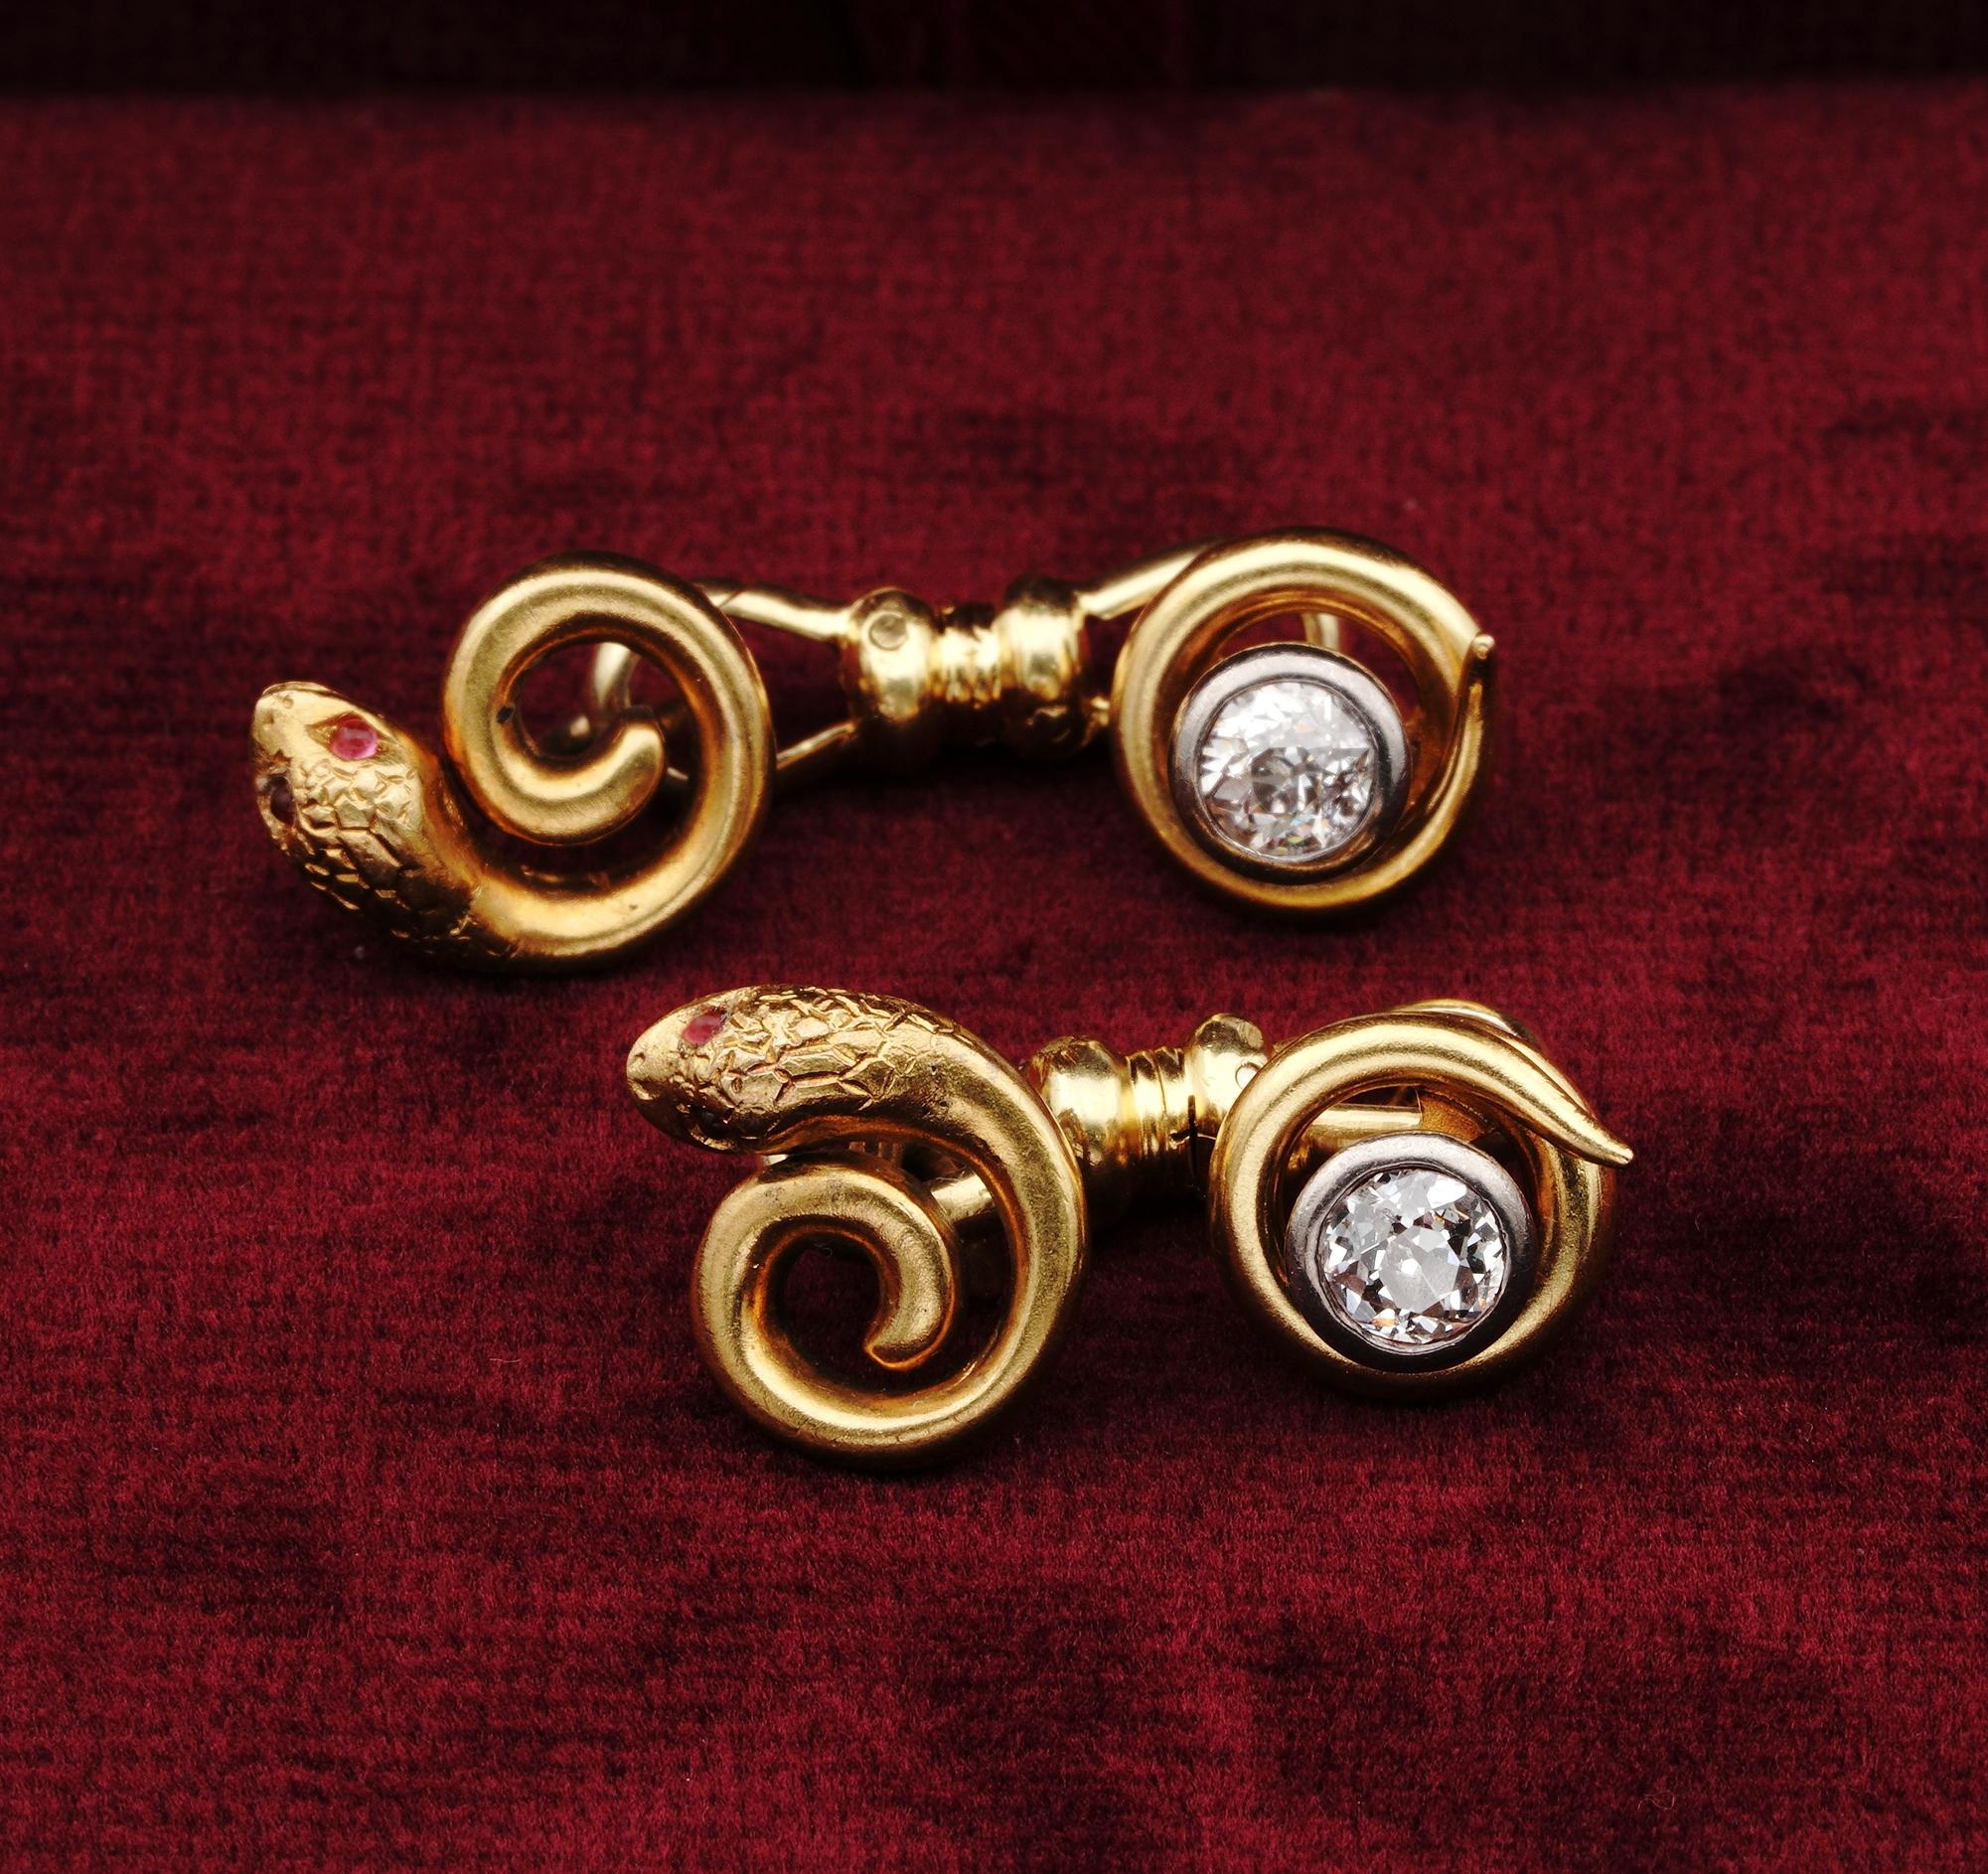 Snakes to Dress Up
Rare and unusual, authentic Victorian Era Snake cufflinks
Finely hand crafted of solid 18 KT antique, rich gold colour not marked as the majority of antiques of this age – skilfully made of the most fascinating snake design in